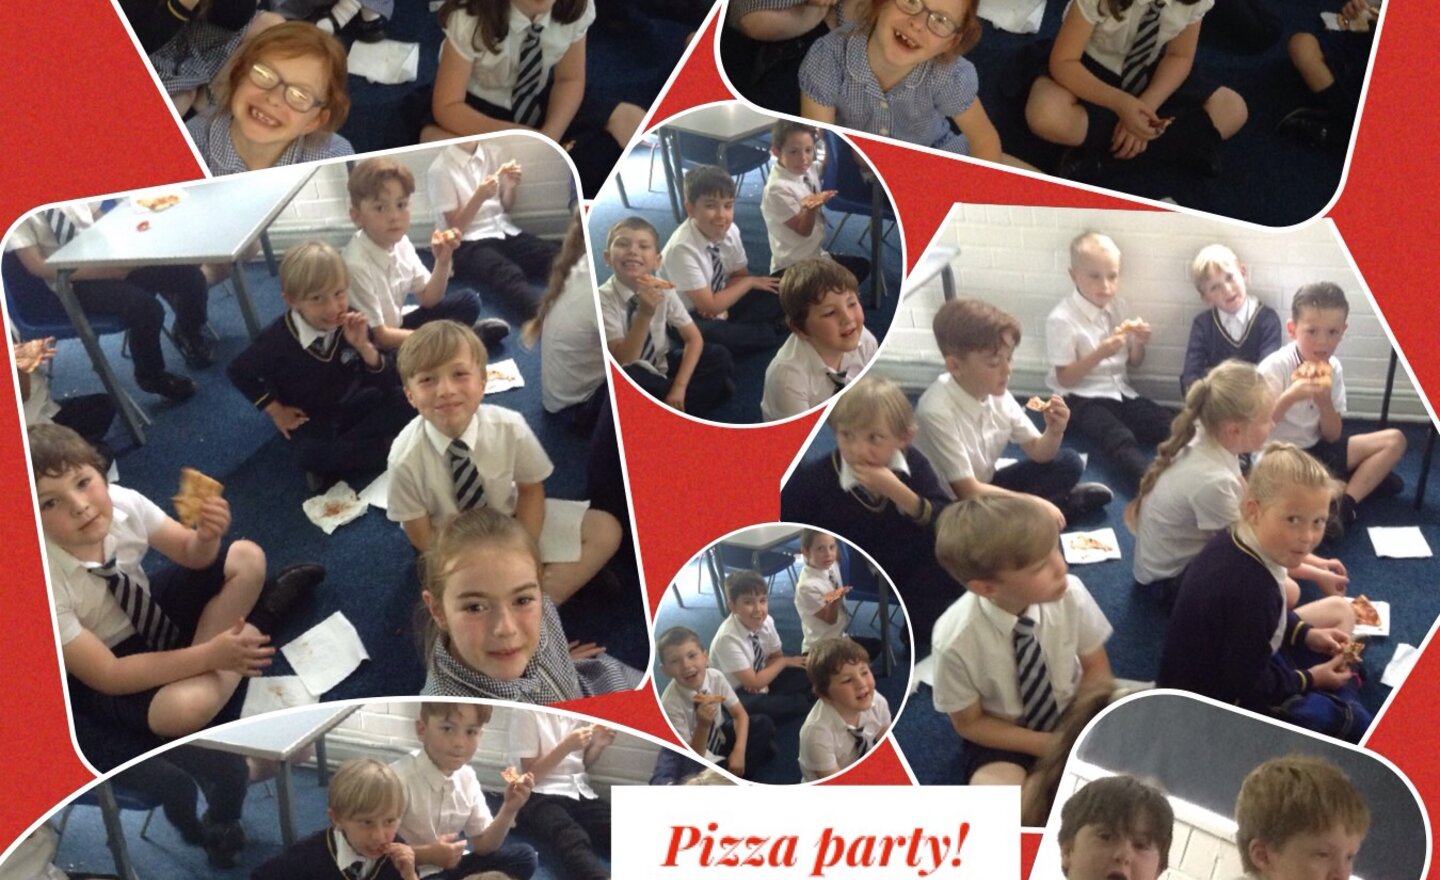 Image of Pizza Party!